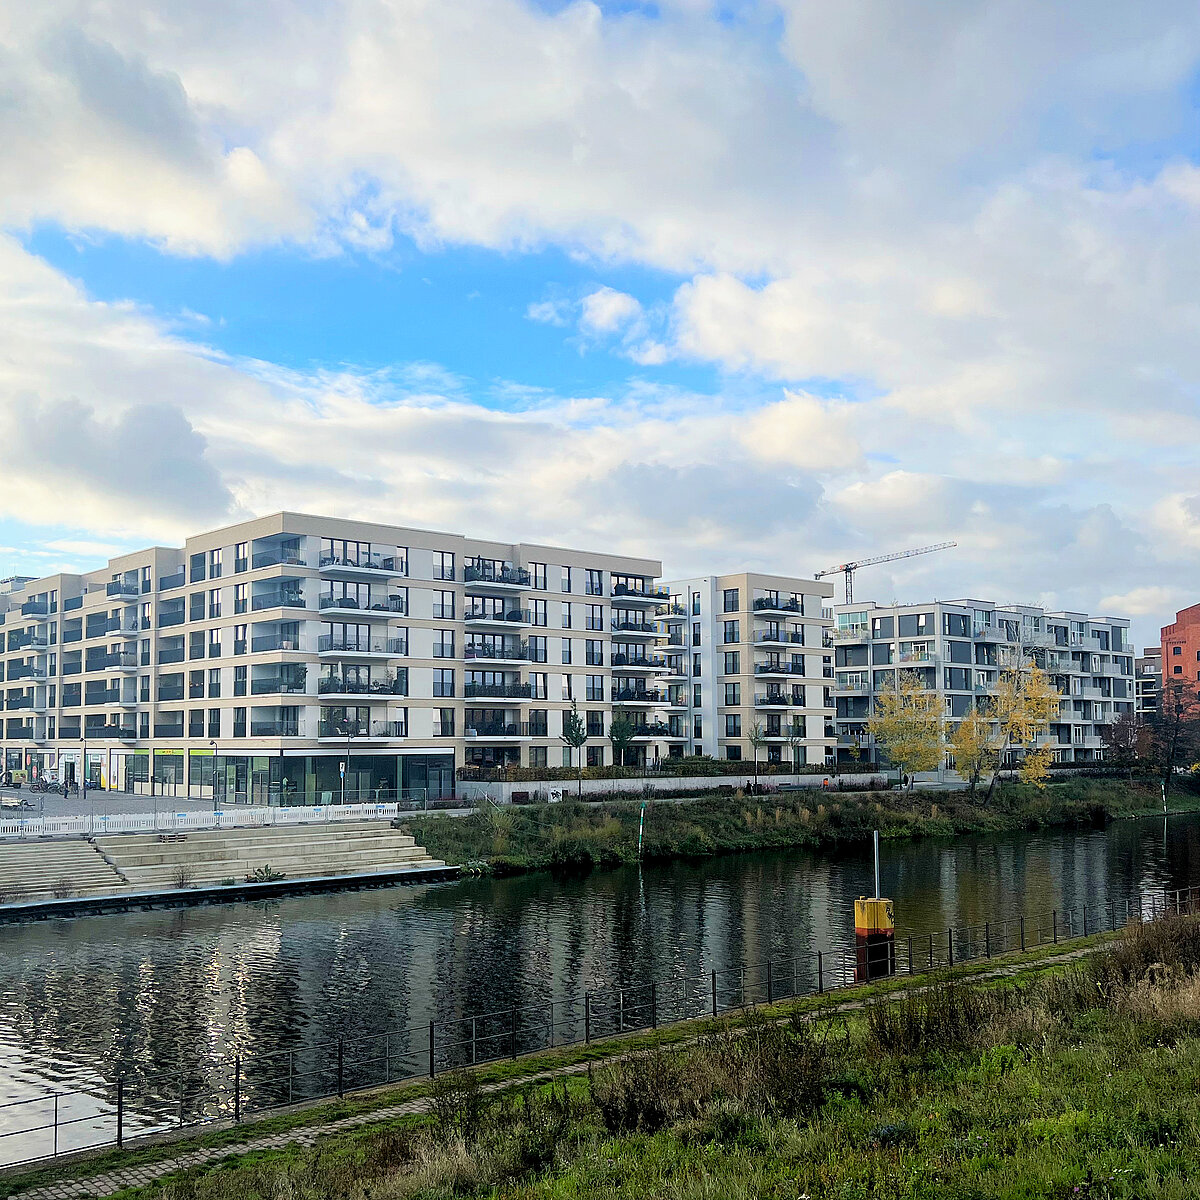 Photo of the residential properties in Europacity Berlin